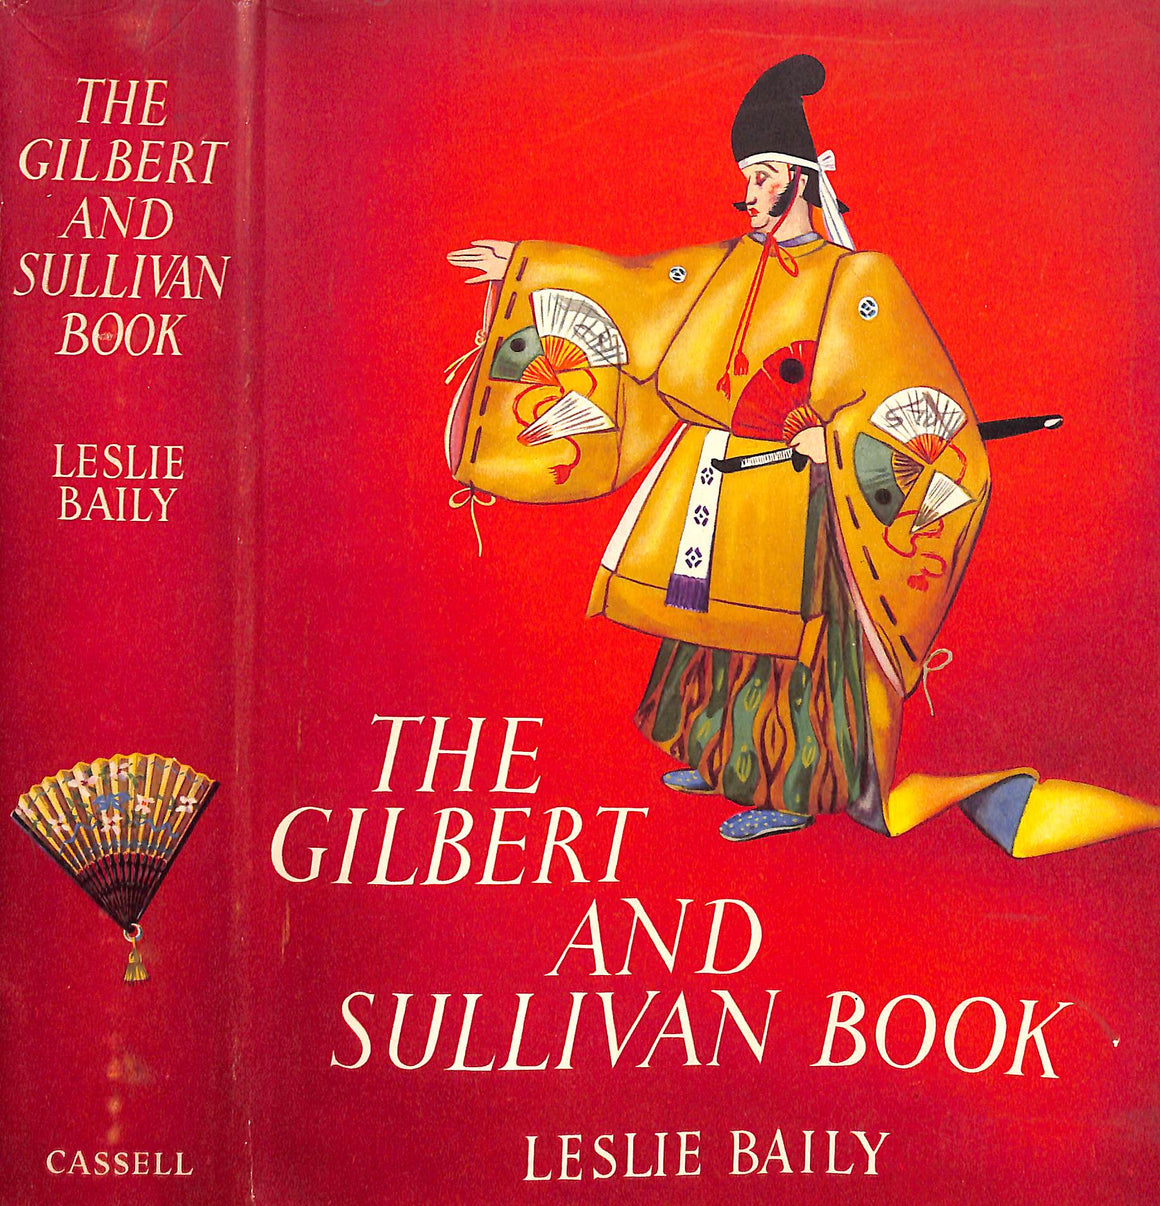 "The Gilbert And Sullivan Book" 1952 BAILY, Leslie